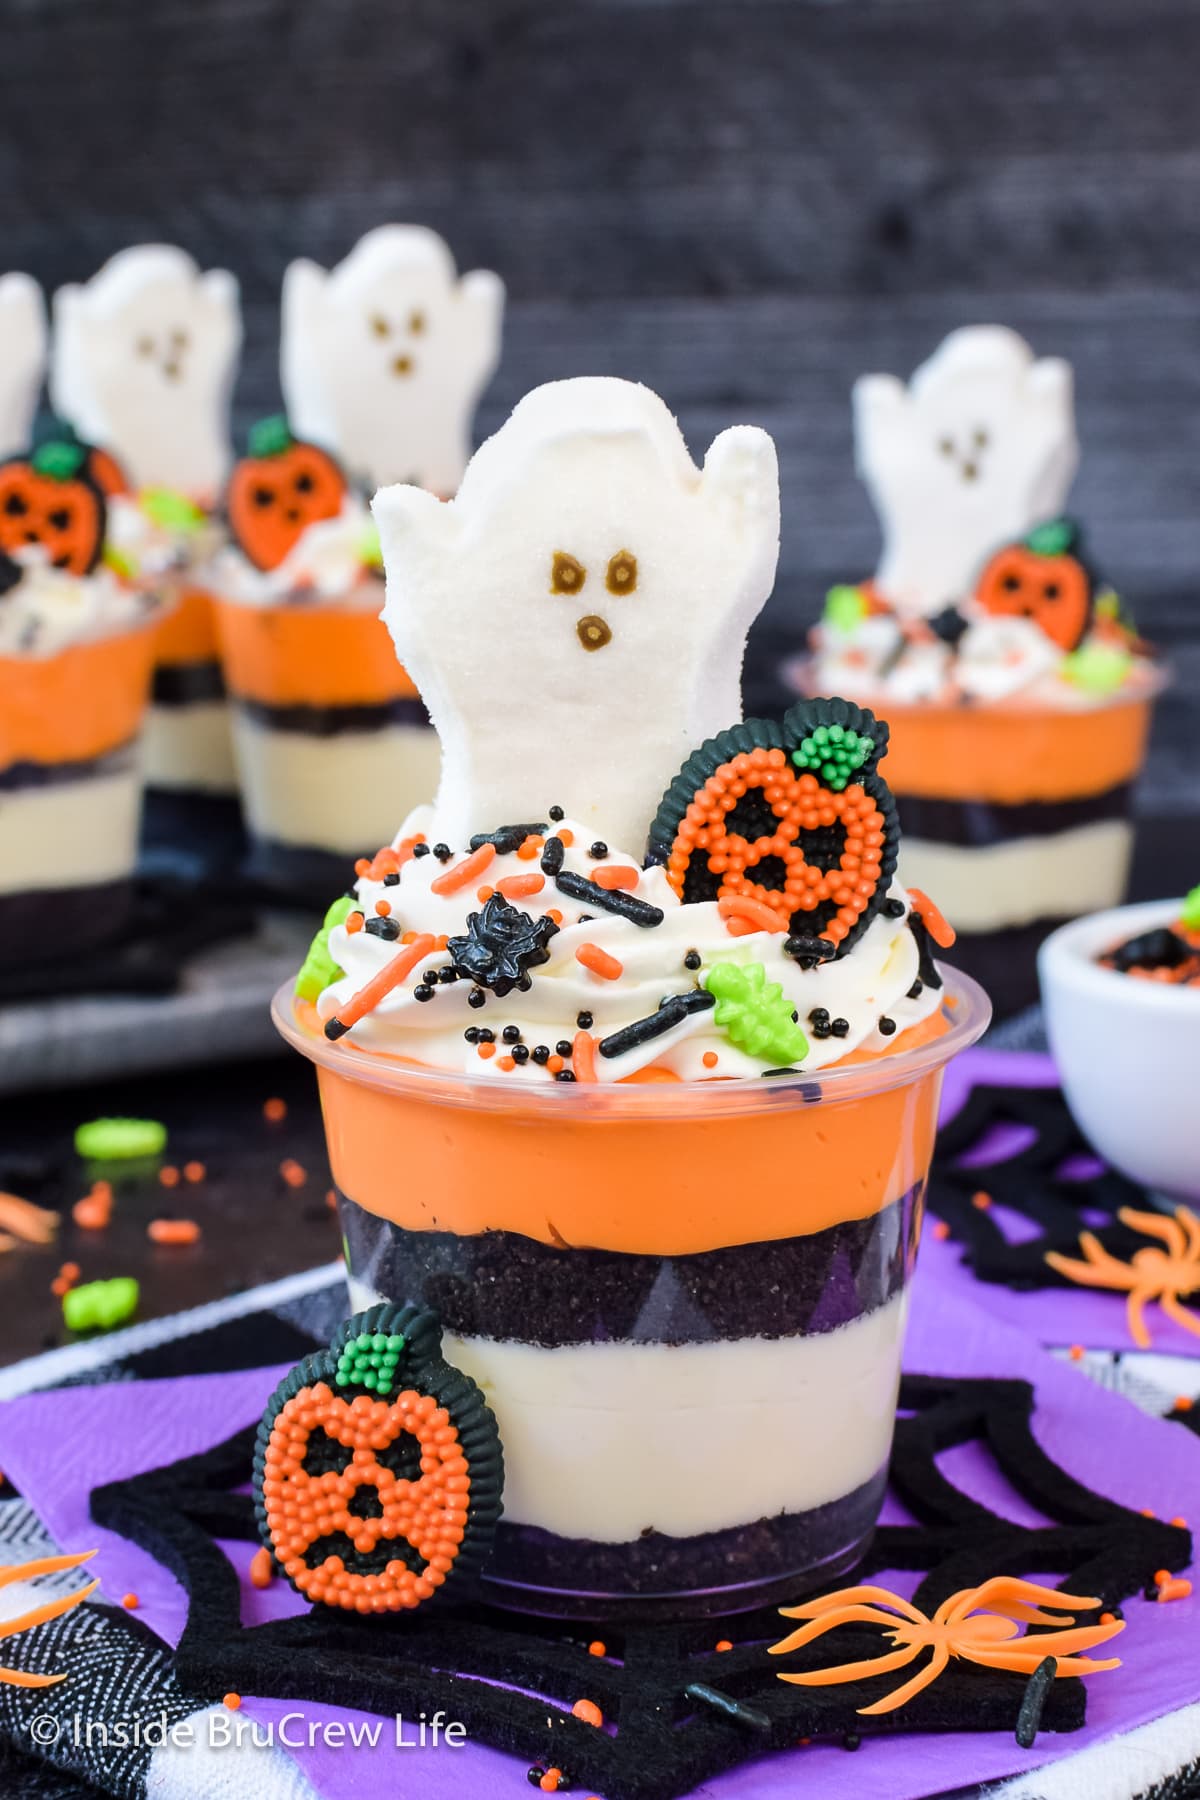 Spooky cream cheese parfaits topped with ghost peeps.